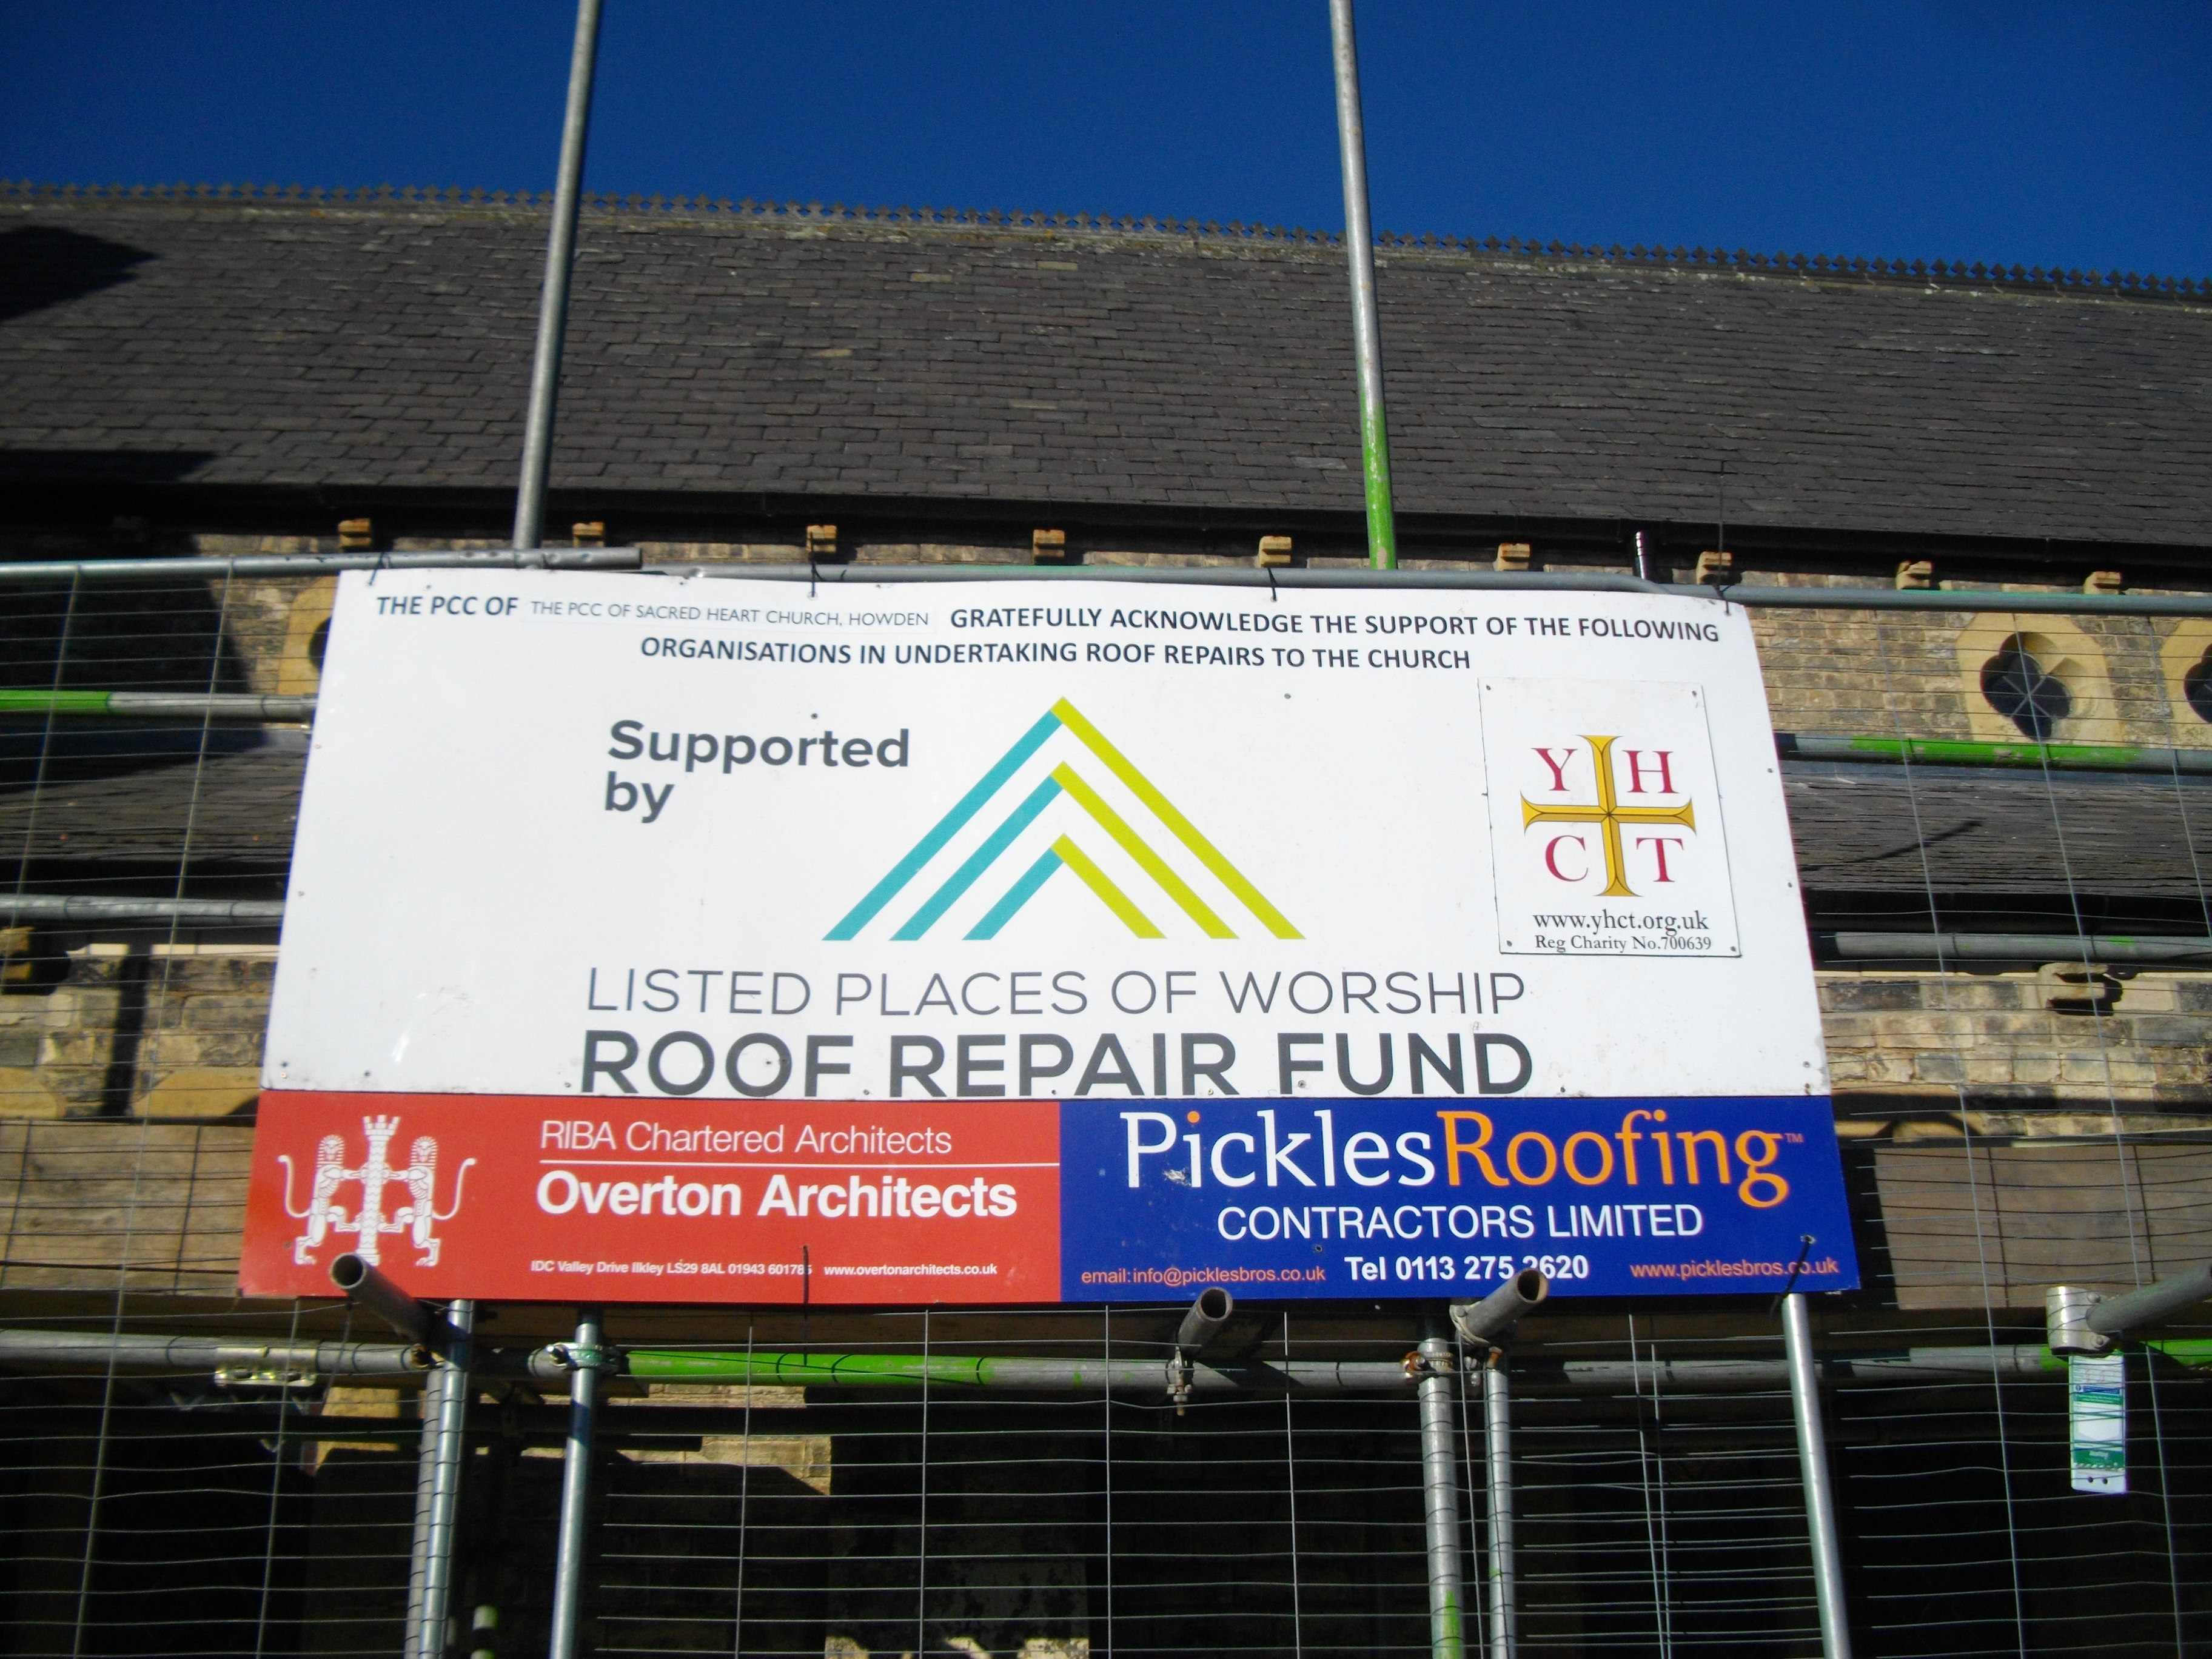 Our Roofers' Sign